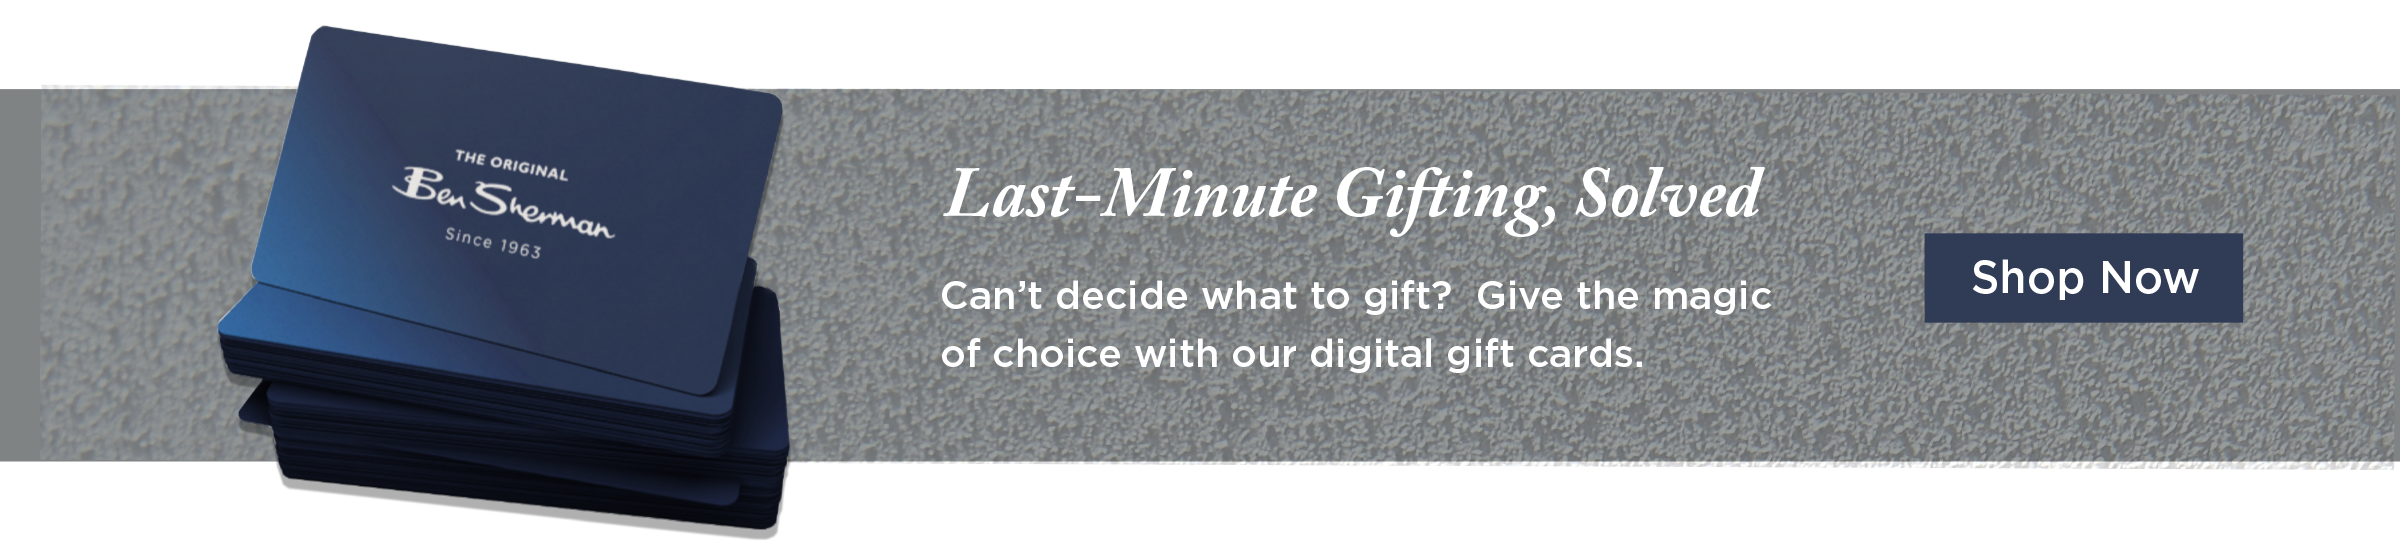 Last-minute gifting solved. Give the magic of choice with our digital gift cards - shop now